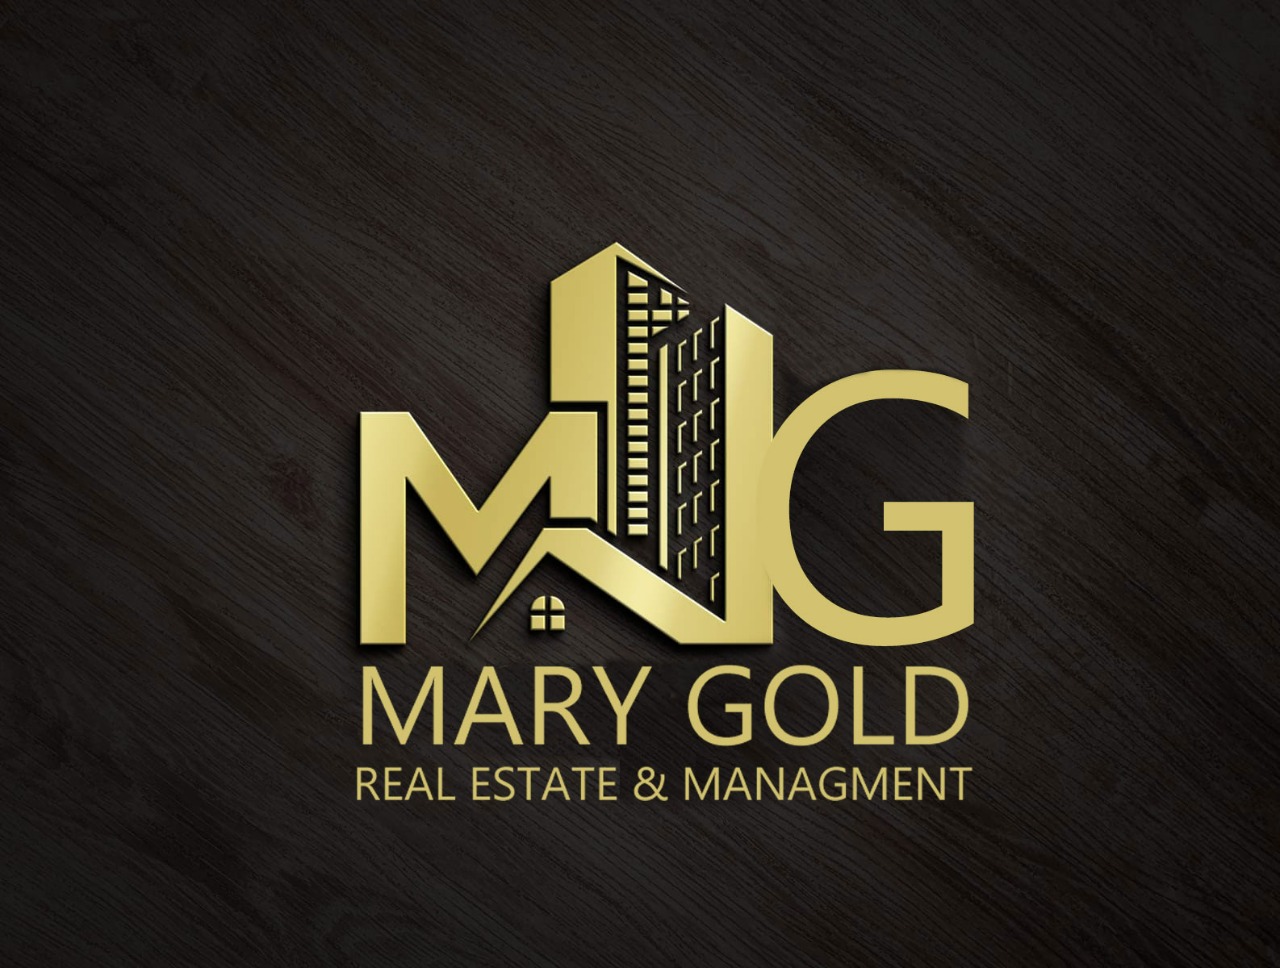 Mary Gold Real Estate